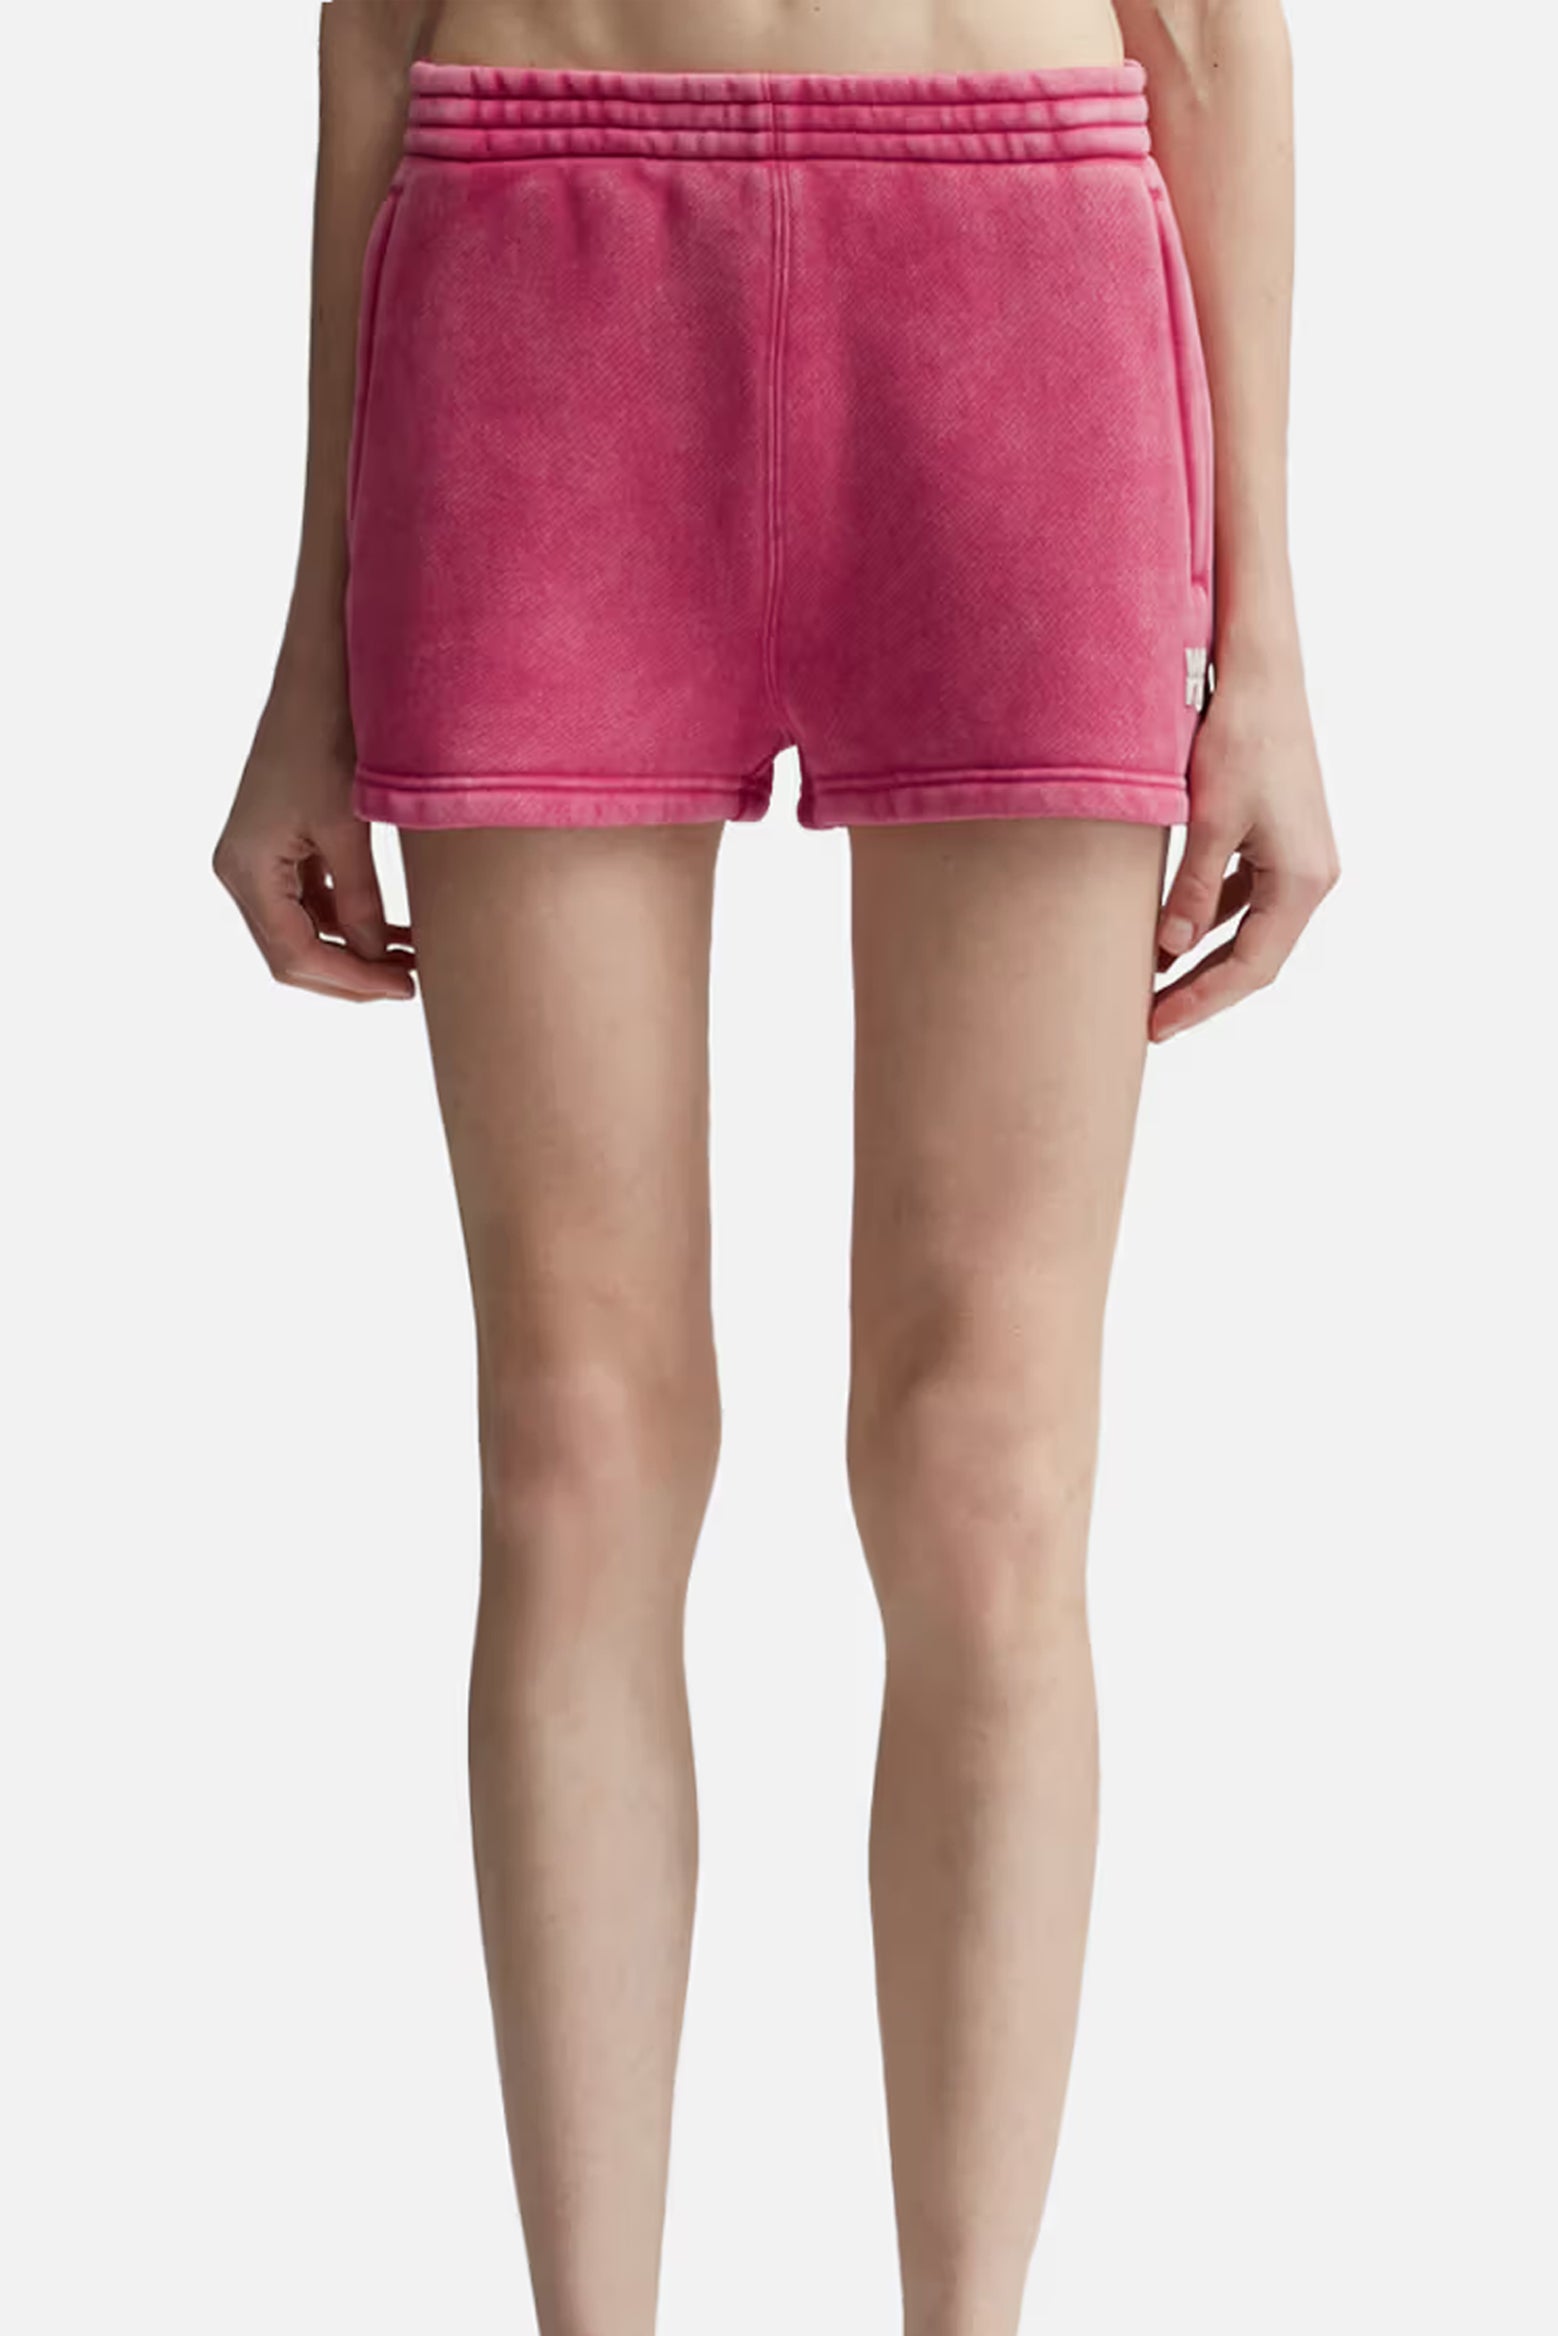 The Alexander Wang Essential Terry Sweatshort in Soft Cherry available at The New Trend Australia